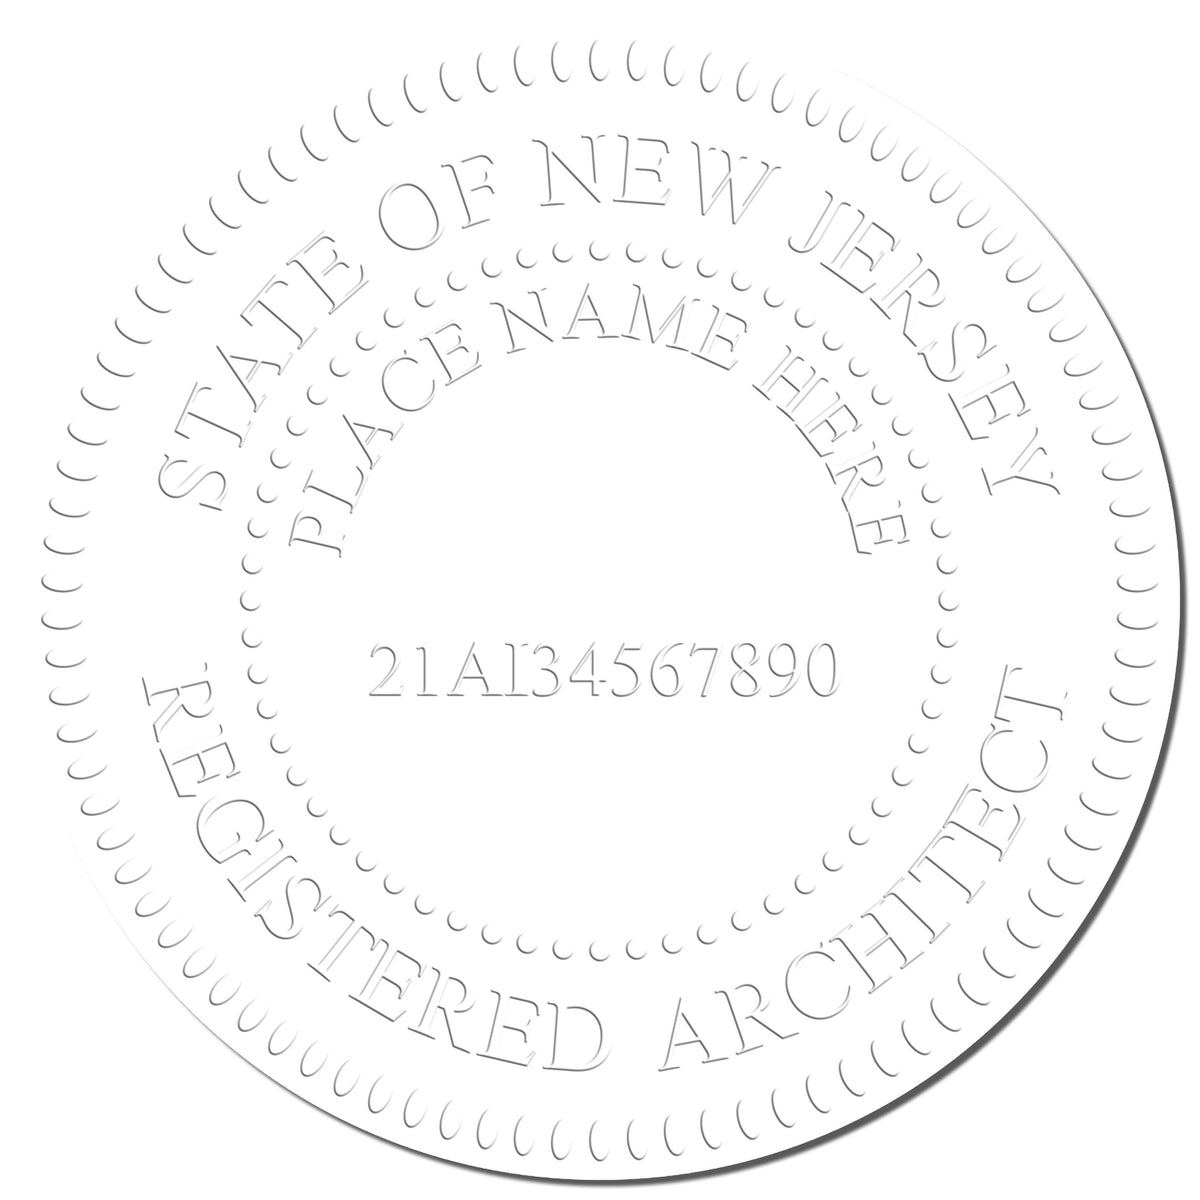 This paper is stamped with a sample imprint of the Hybrid New Jersey Architect Seal, signifying its quality and reliability.